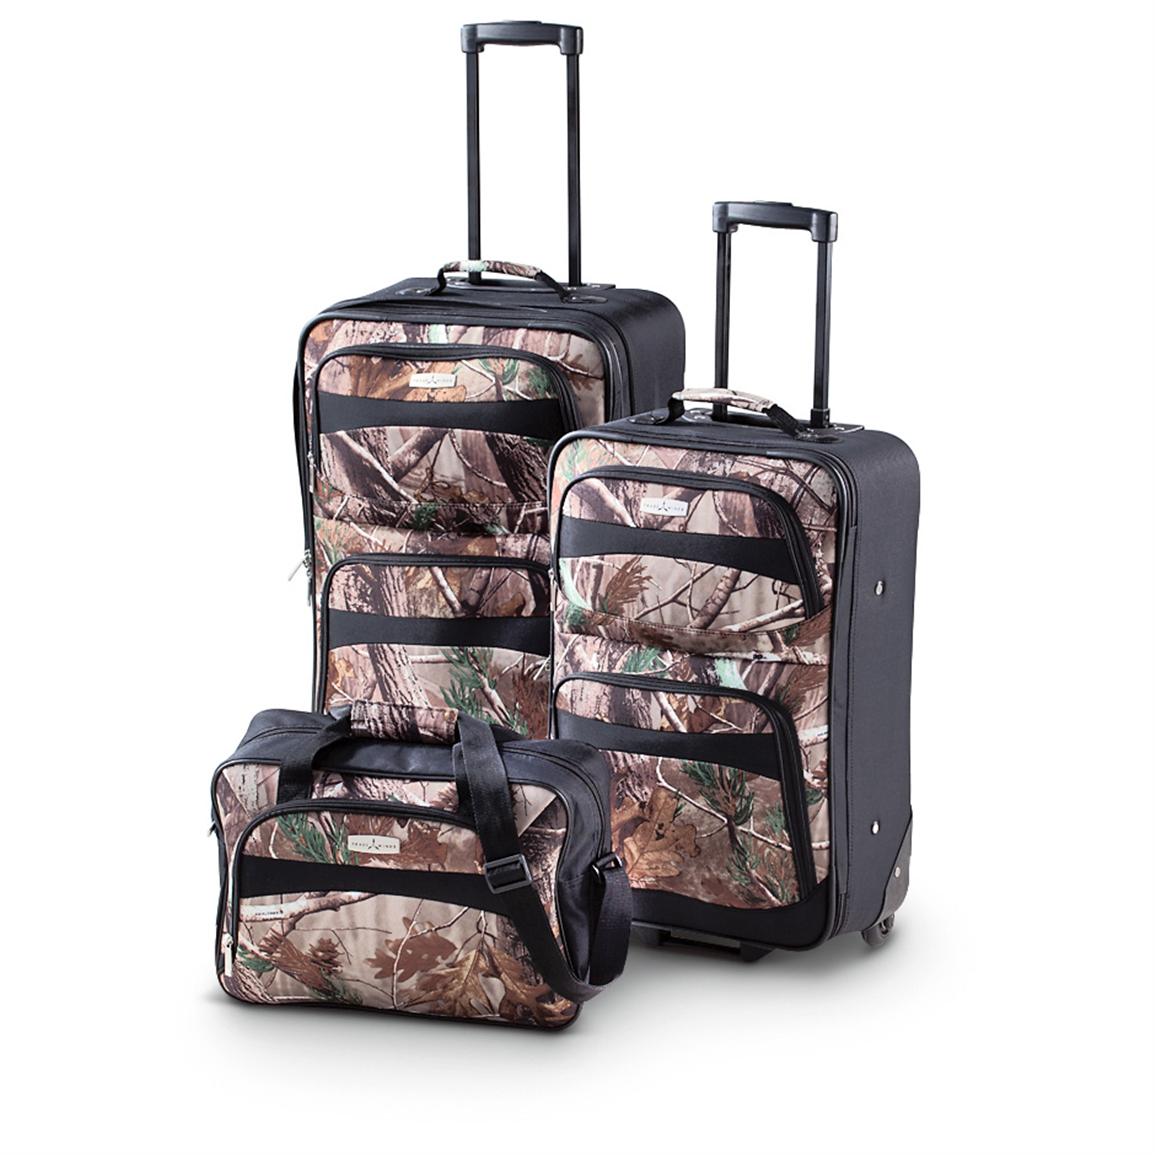 Guess luggage cheap 9mm, luggage sets womens